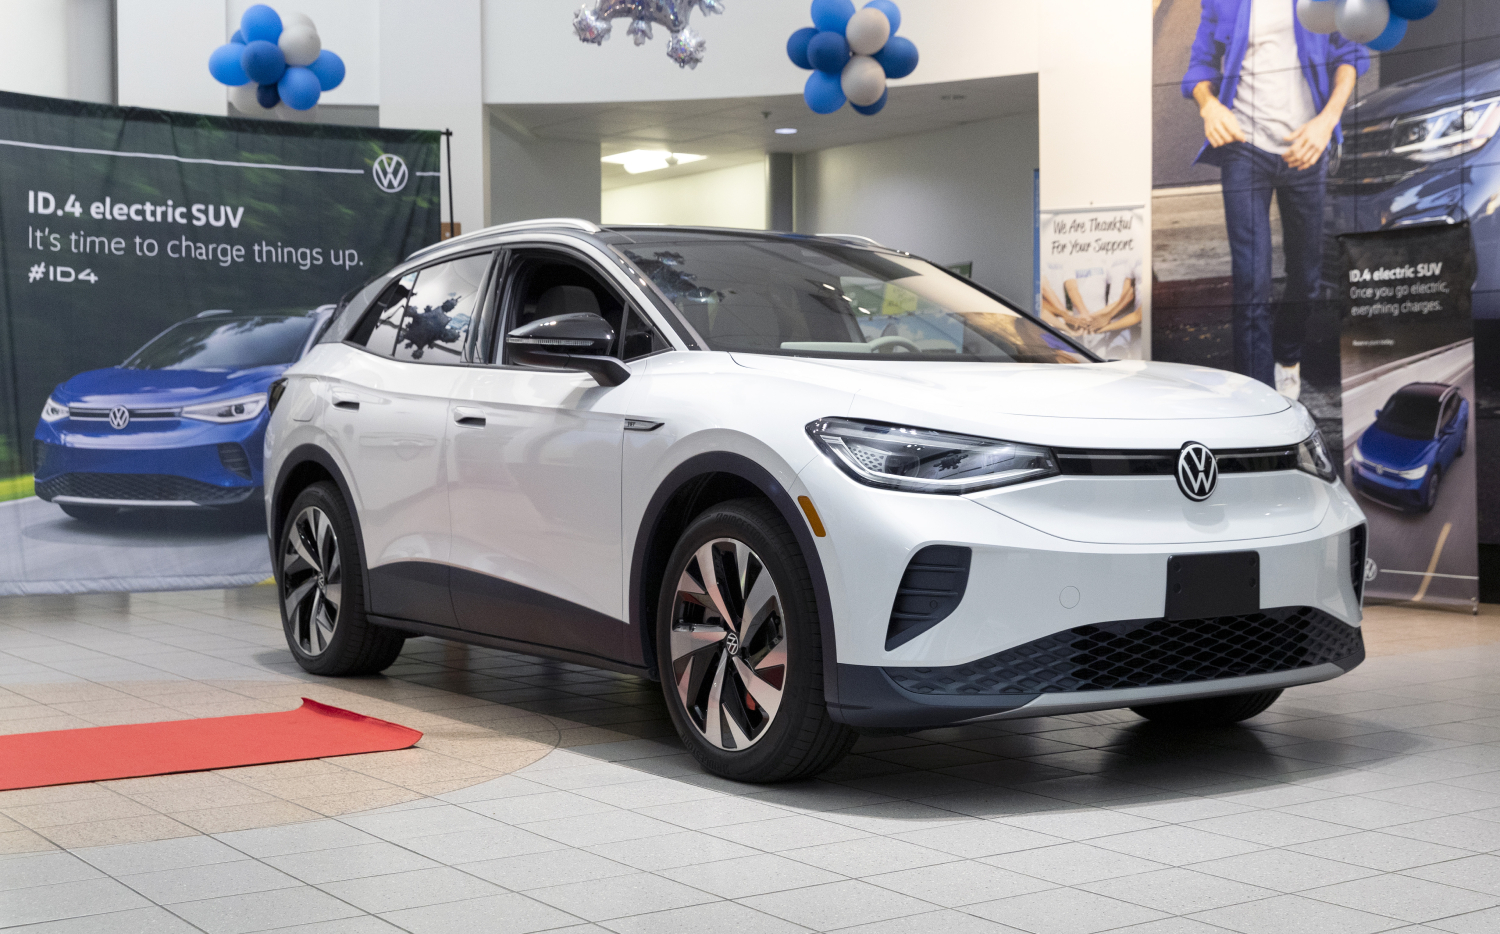 The new all-electric Volkswagen ID.4 sits on a showroom floor in California